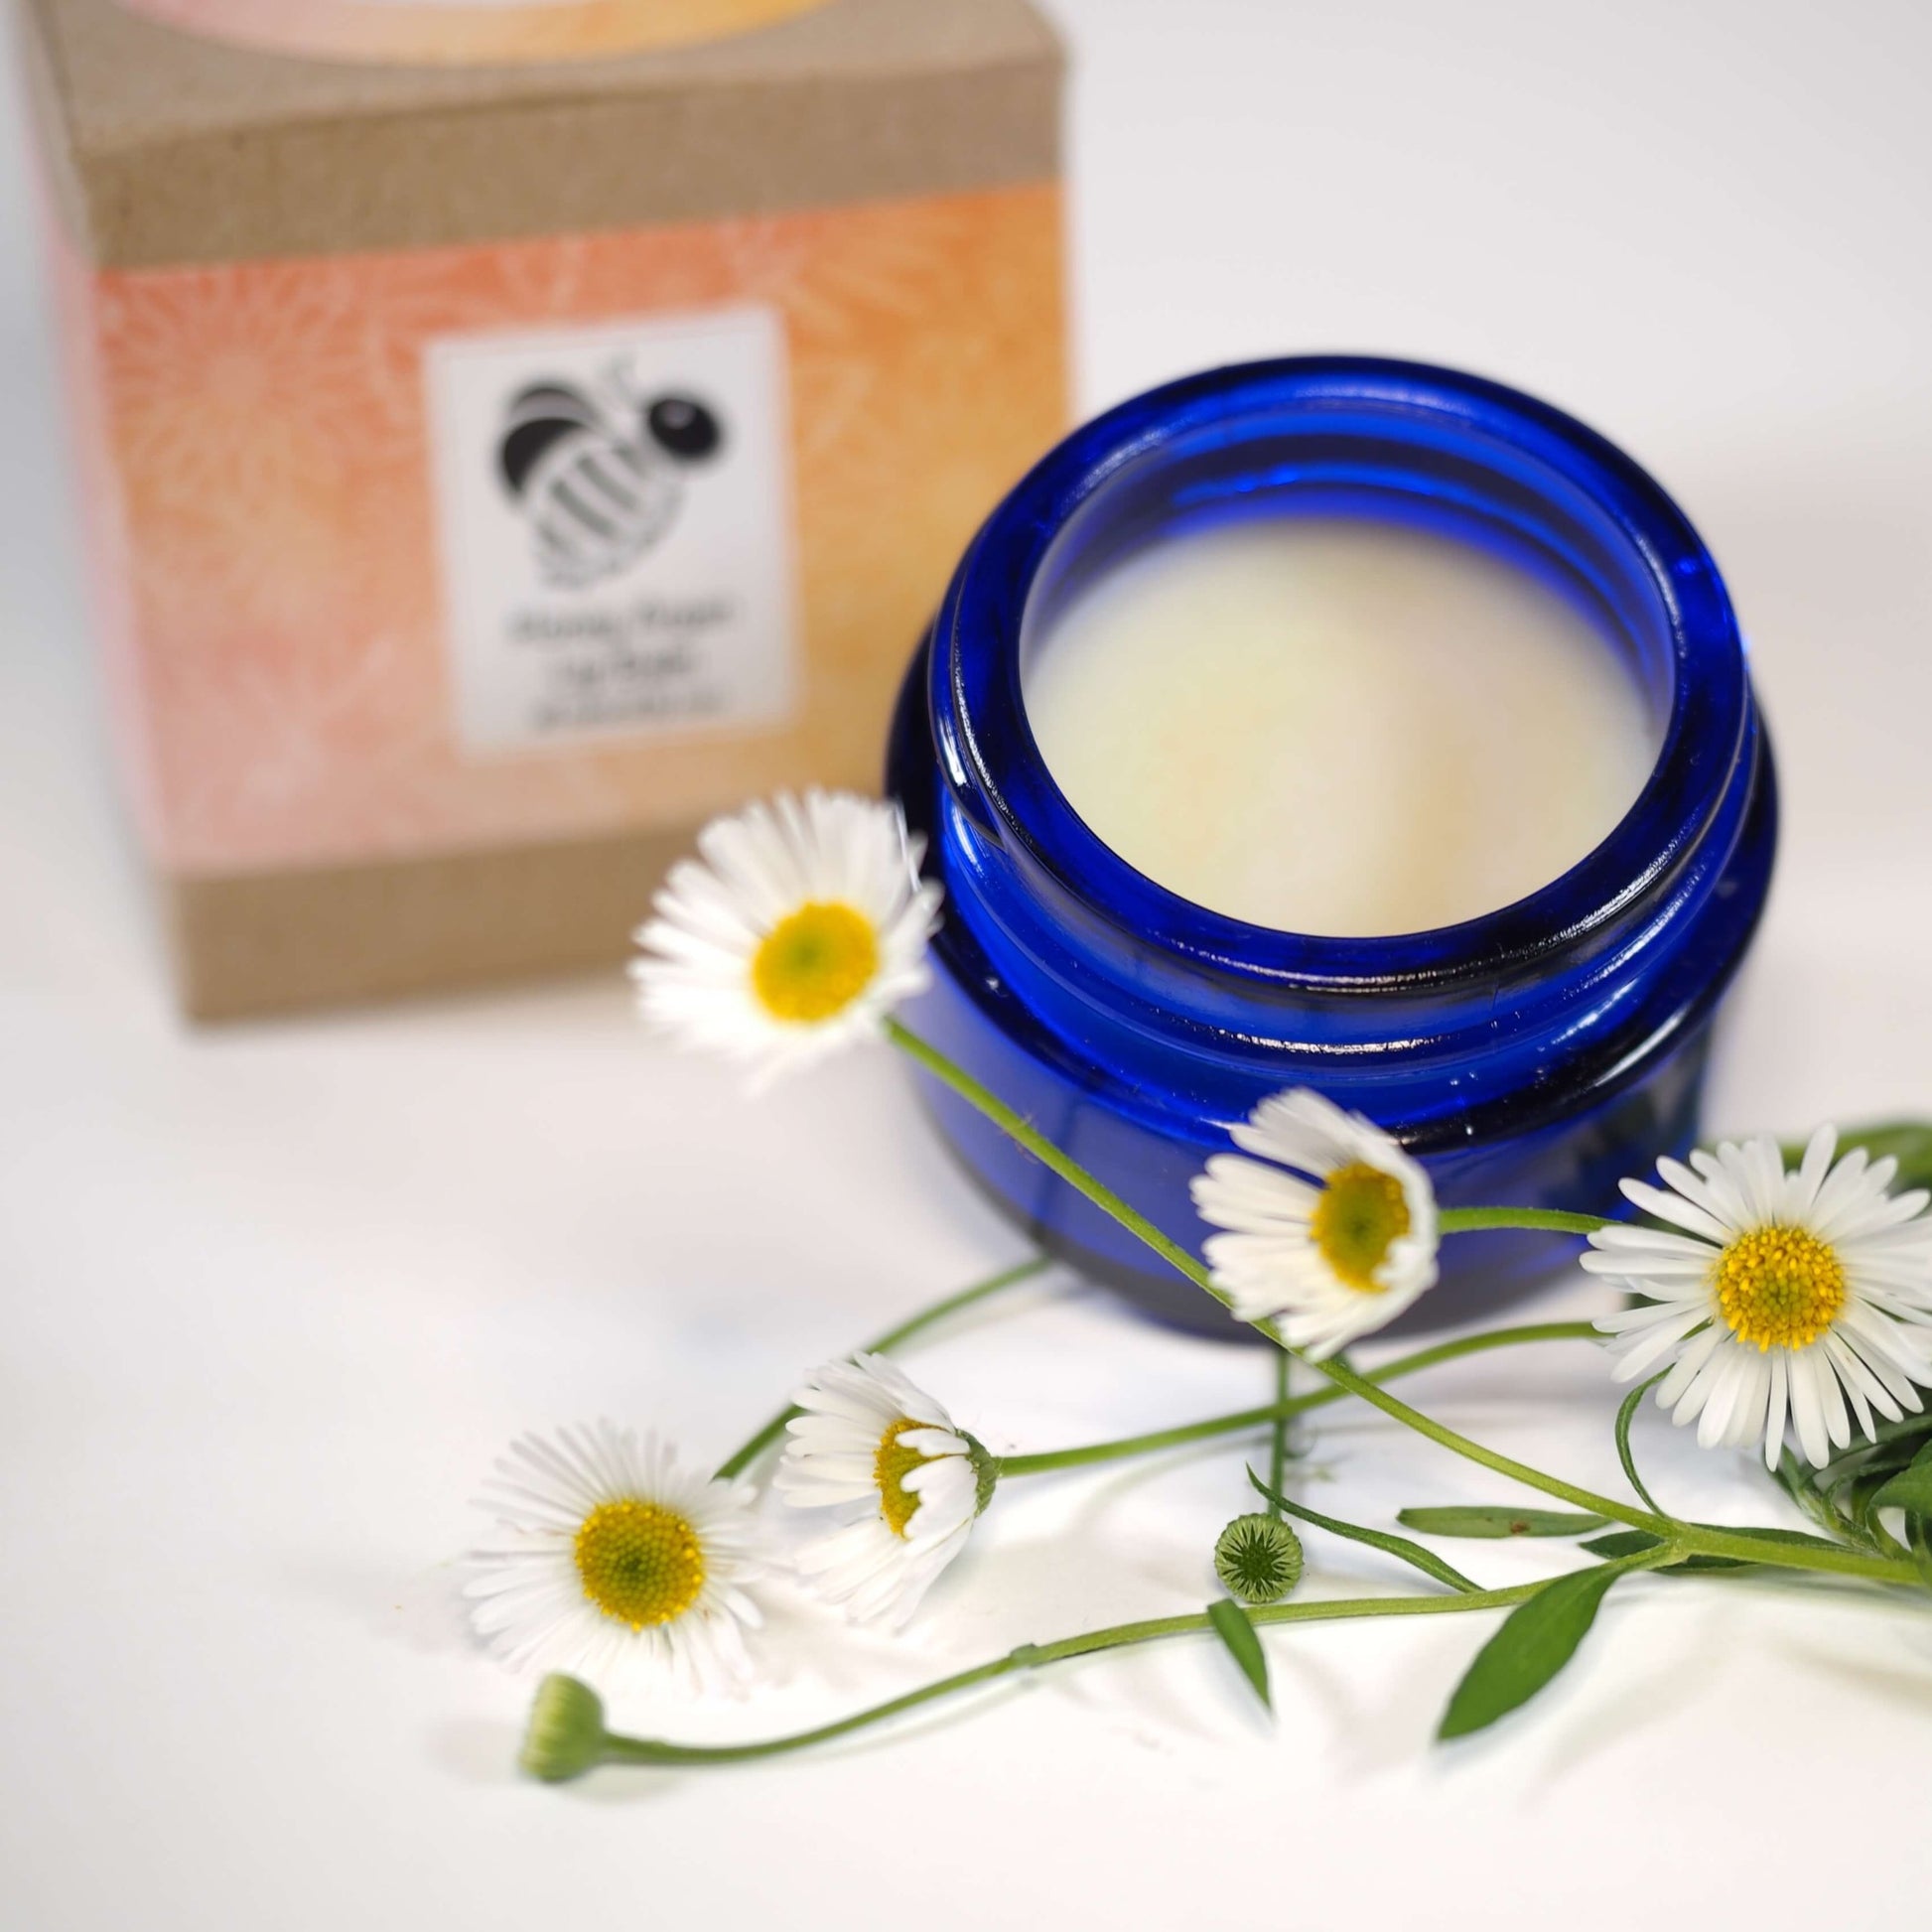 Honey Argan Lip Balm open with package and daisies